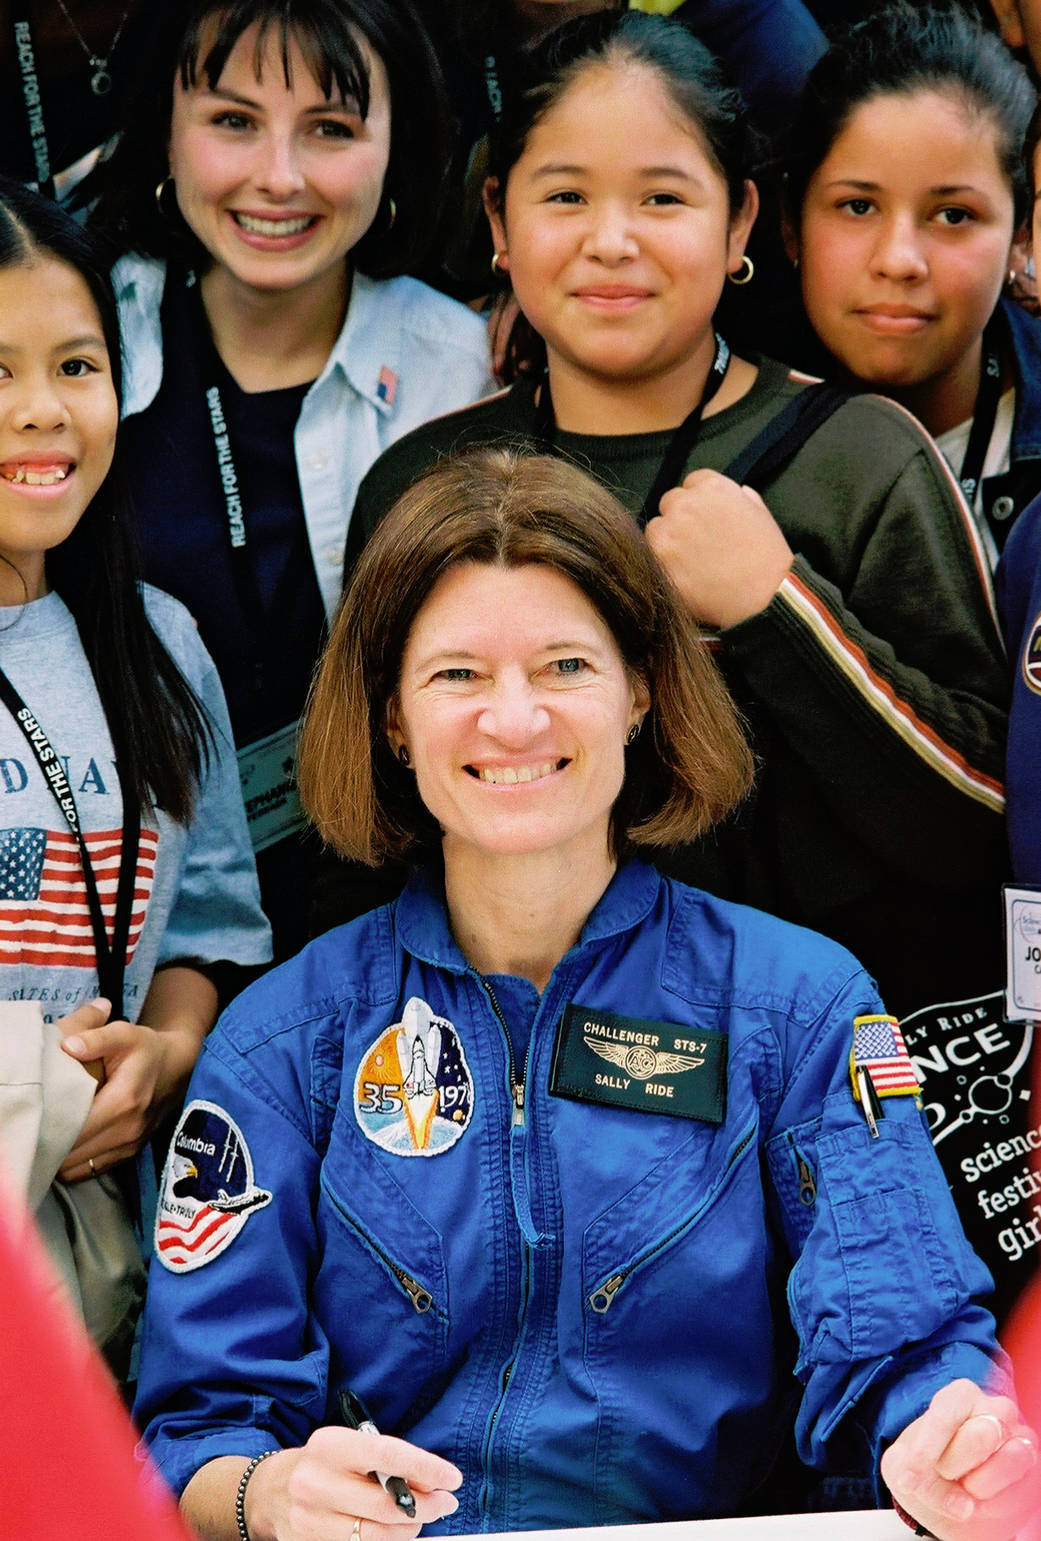 Color image of woman astronaut surrounded by kids.